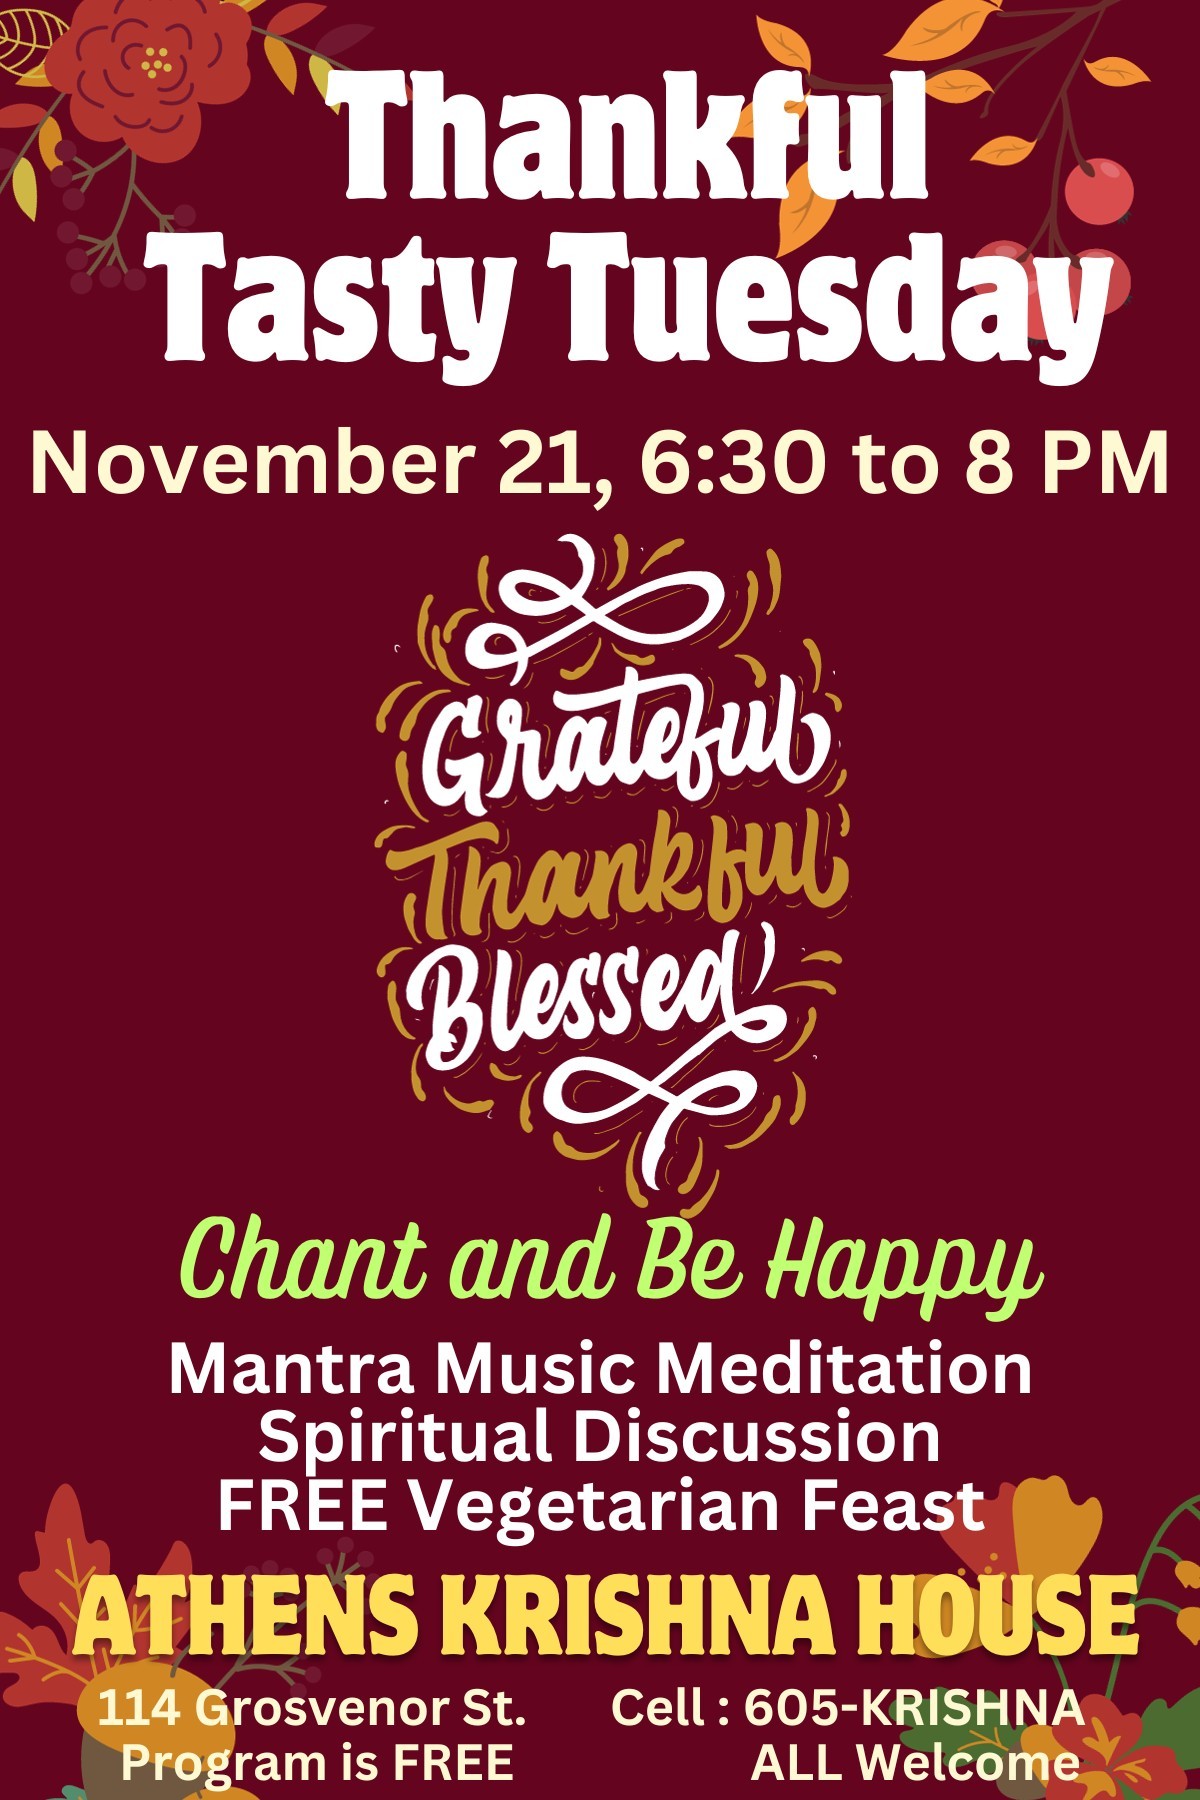 A flyer for Athens Krishna House's Thankful Tasty Tuesday on November 21, 6:30 p.m. - 8 p.m. The flyer reads: Grateful, Thankful, Blessed. Chant and be happy. Mantra music meditation, spiritual discussion, free vegetarian feast.